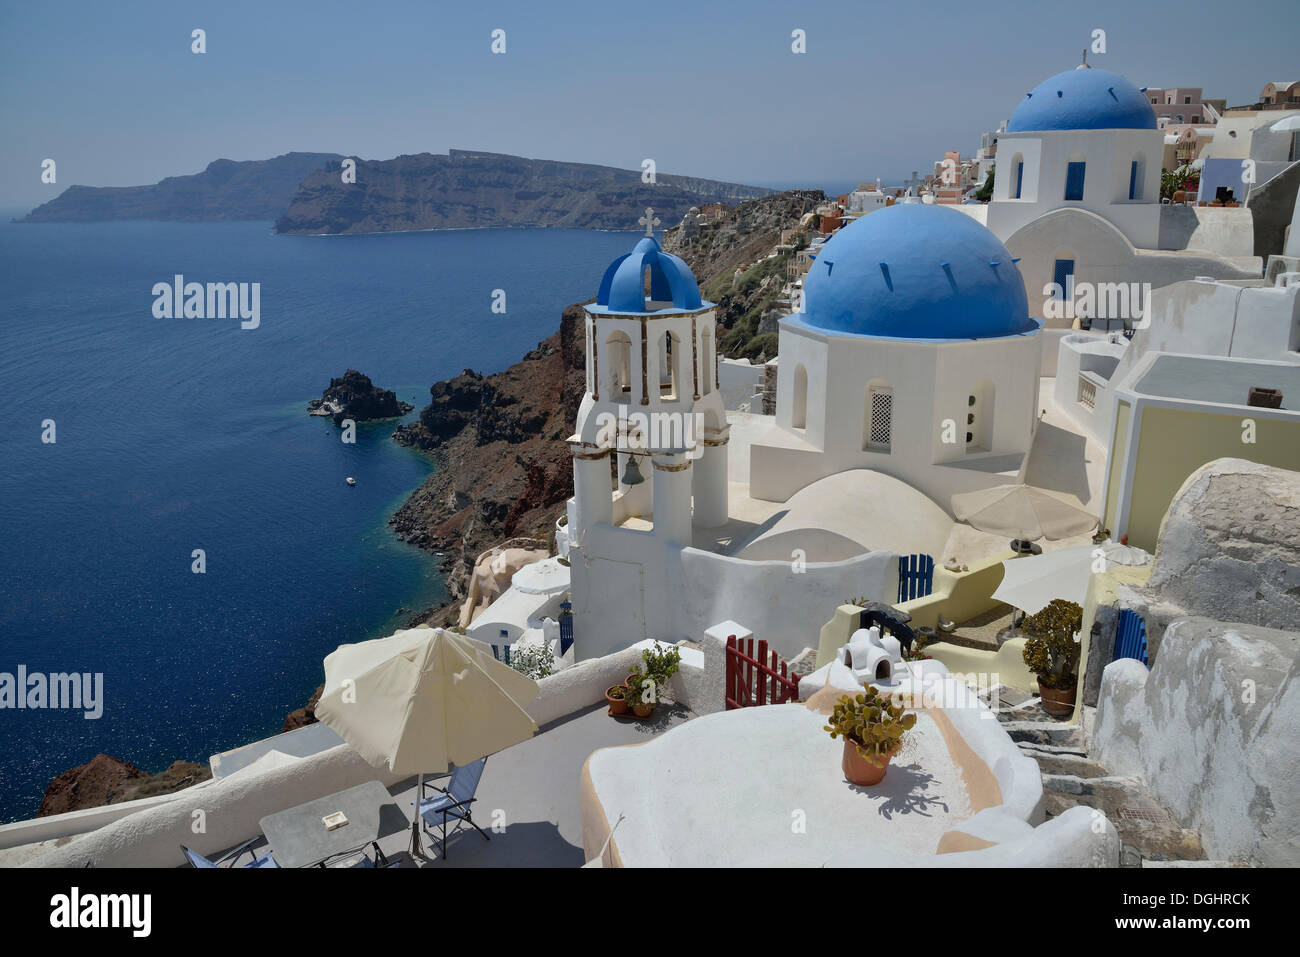 View from the rim across the rooftops or Oía into the Caldera, Oía, Santorini, Cyclades, Greek Islands, Greece, Europe Stock Photo